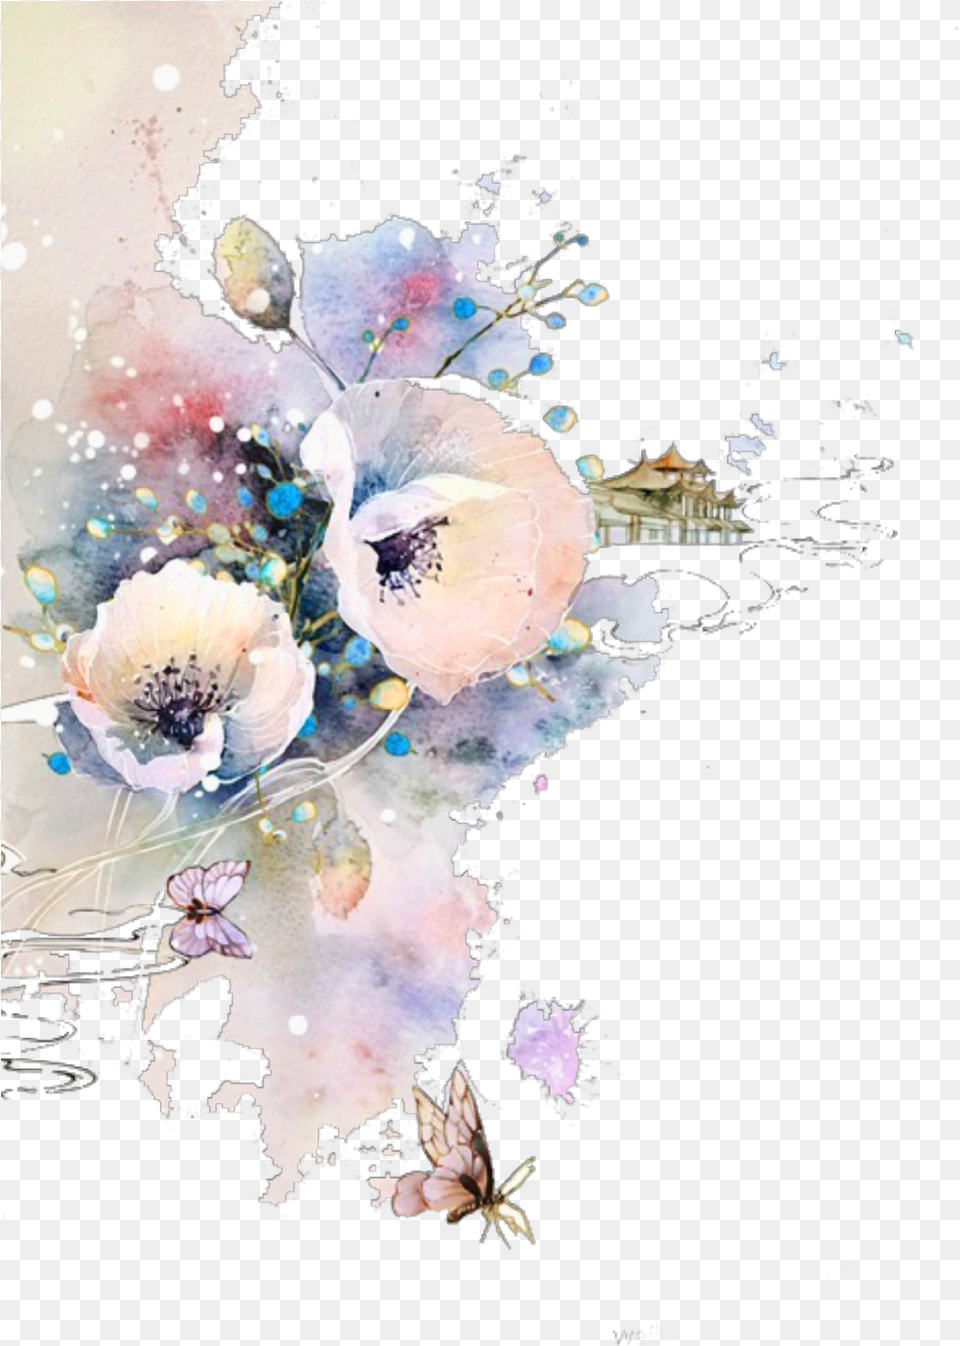 Watercolor Floral Corner Download Flowers And Butterflies Corner Borders, Graphics, Painting, Floral Design, Art Png Image